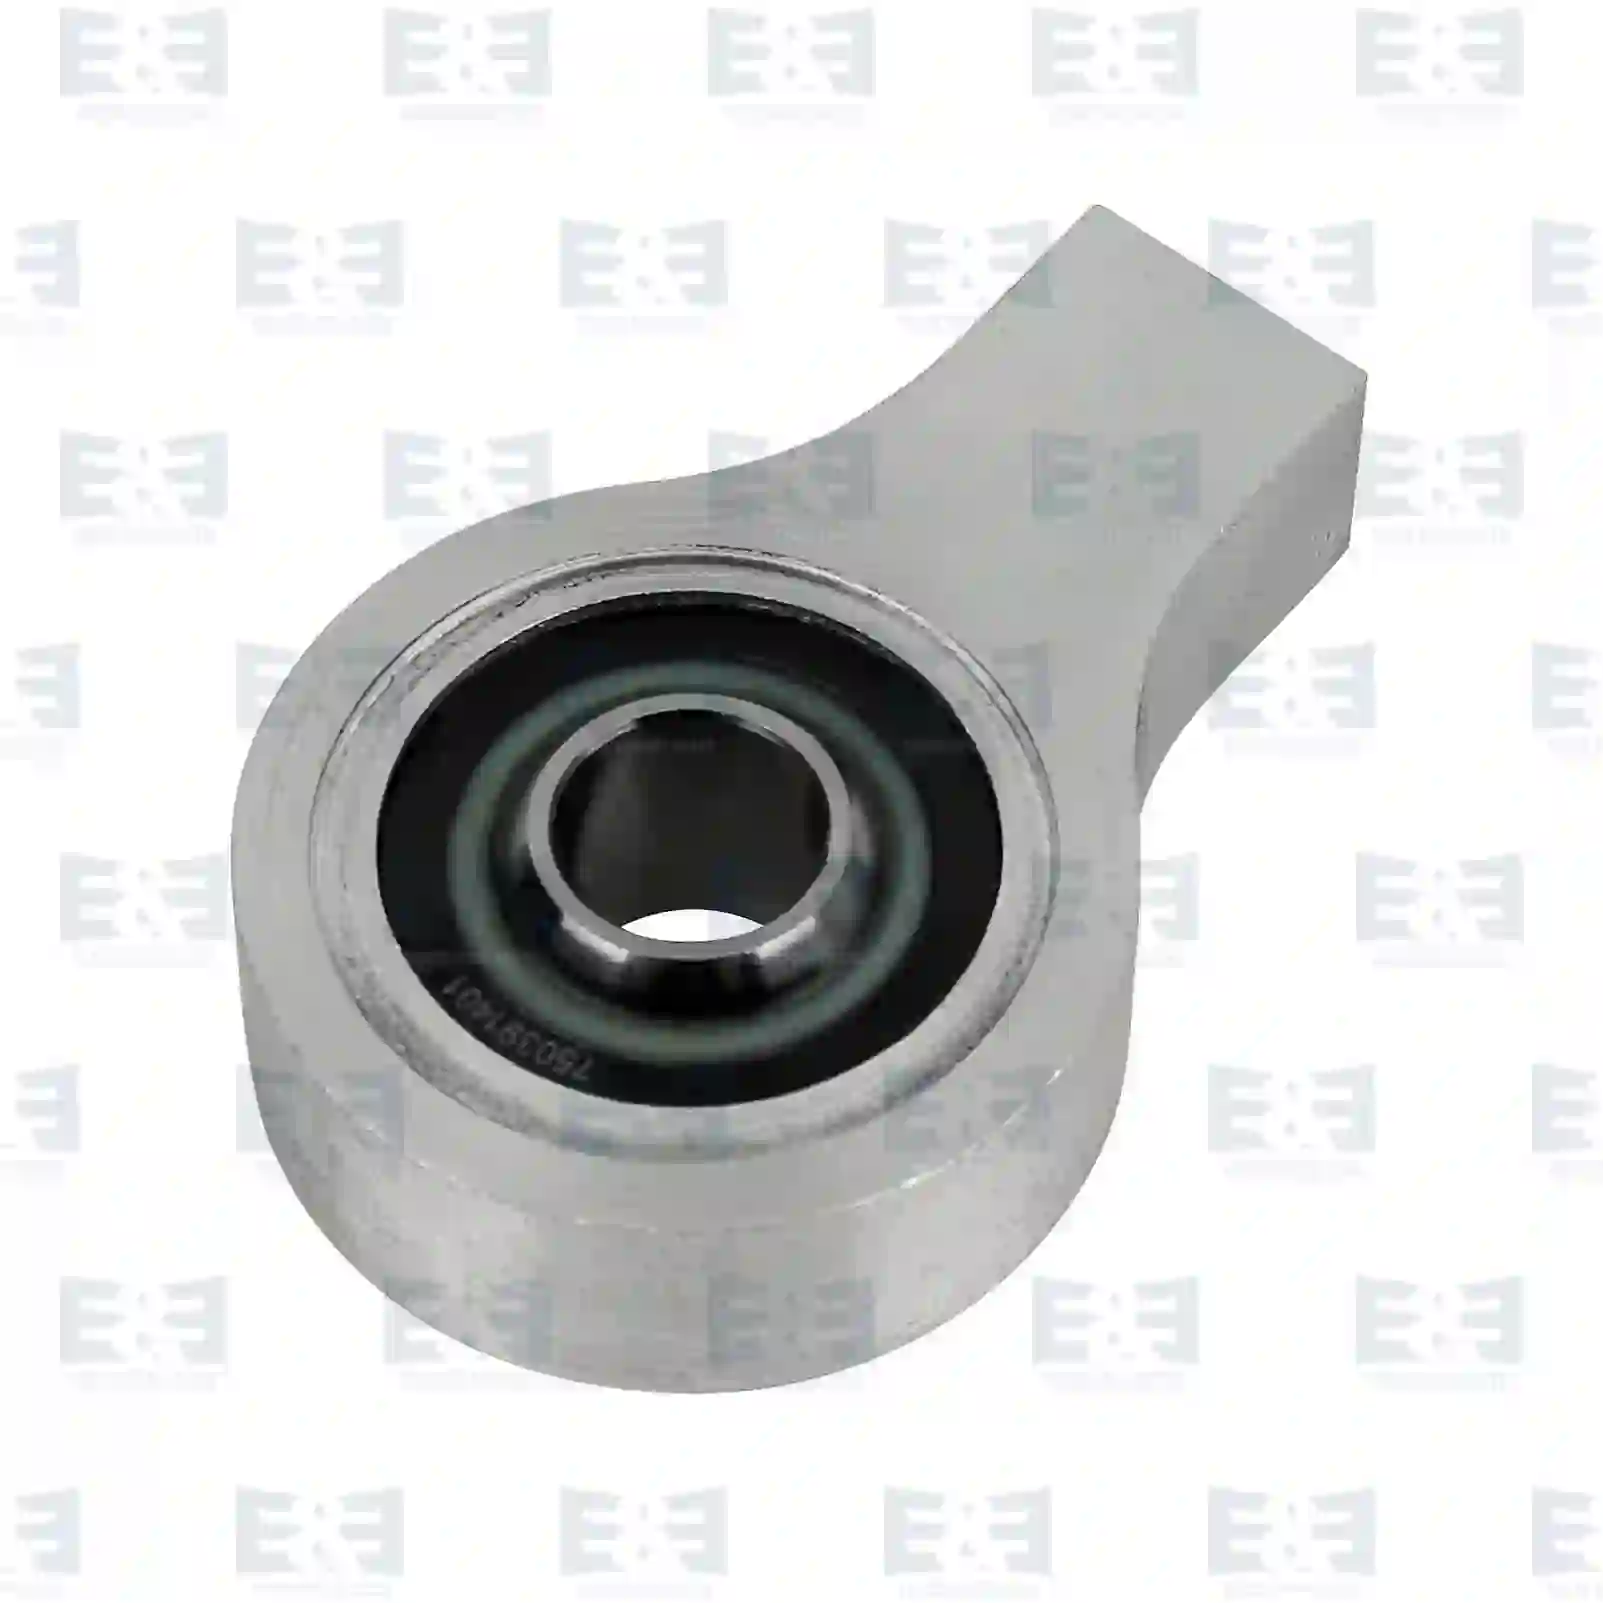 Bearing joint, cabin shock absorber, 2E2275778, 1364293, 1443114, 1504160, 1744210, 504160, ZG40851-0008 ||  2E2275778 E&E Truck Spare Parts | Truck Spare Parts, Auotomotive Spare Parts Bearing joint, cabin shock absorber, 2E2275778, 1364293, 1443114, 1504160, 1744210, 504160, ZG40851-0008 ||  2E2275778 E&E Truck Spare Parts | Truck Spare Parts, Auotomotive Spare Parts